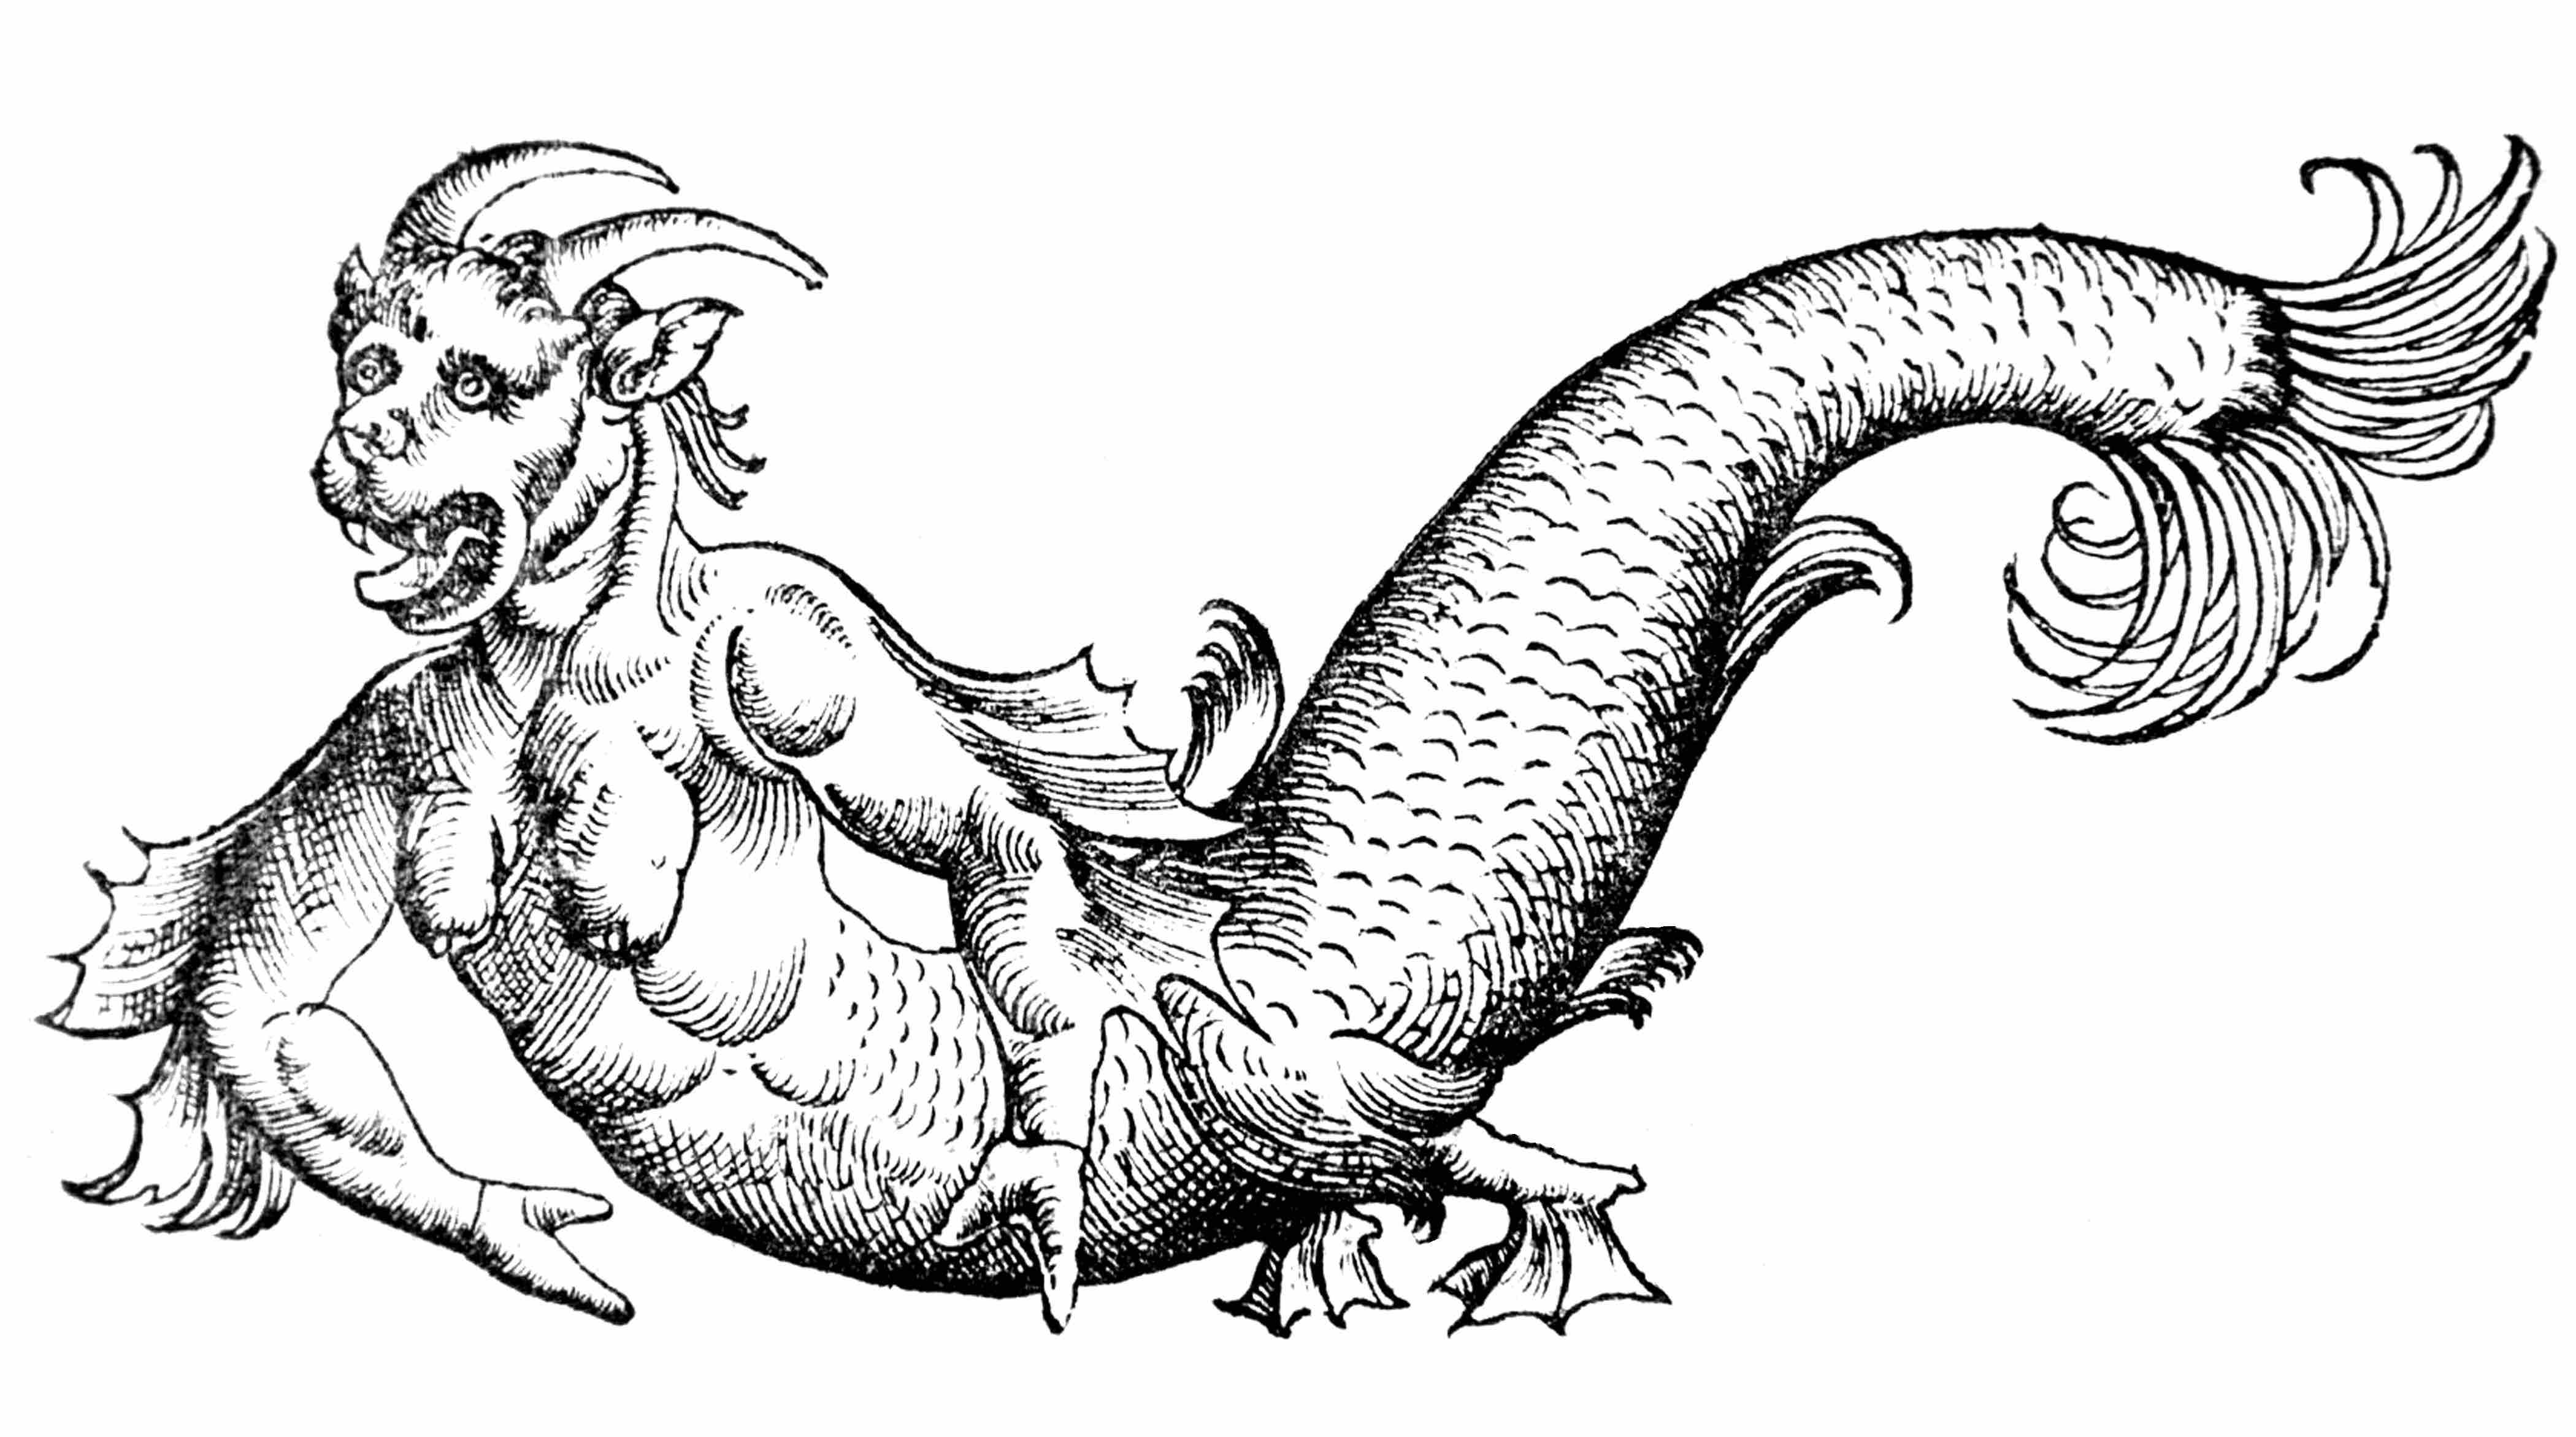 Drawing of an imaginary creature that looks like a mermaid with two horns on the head